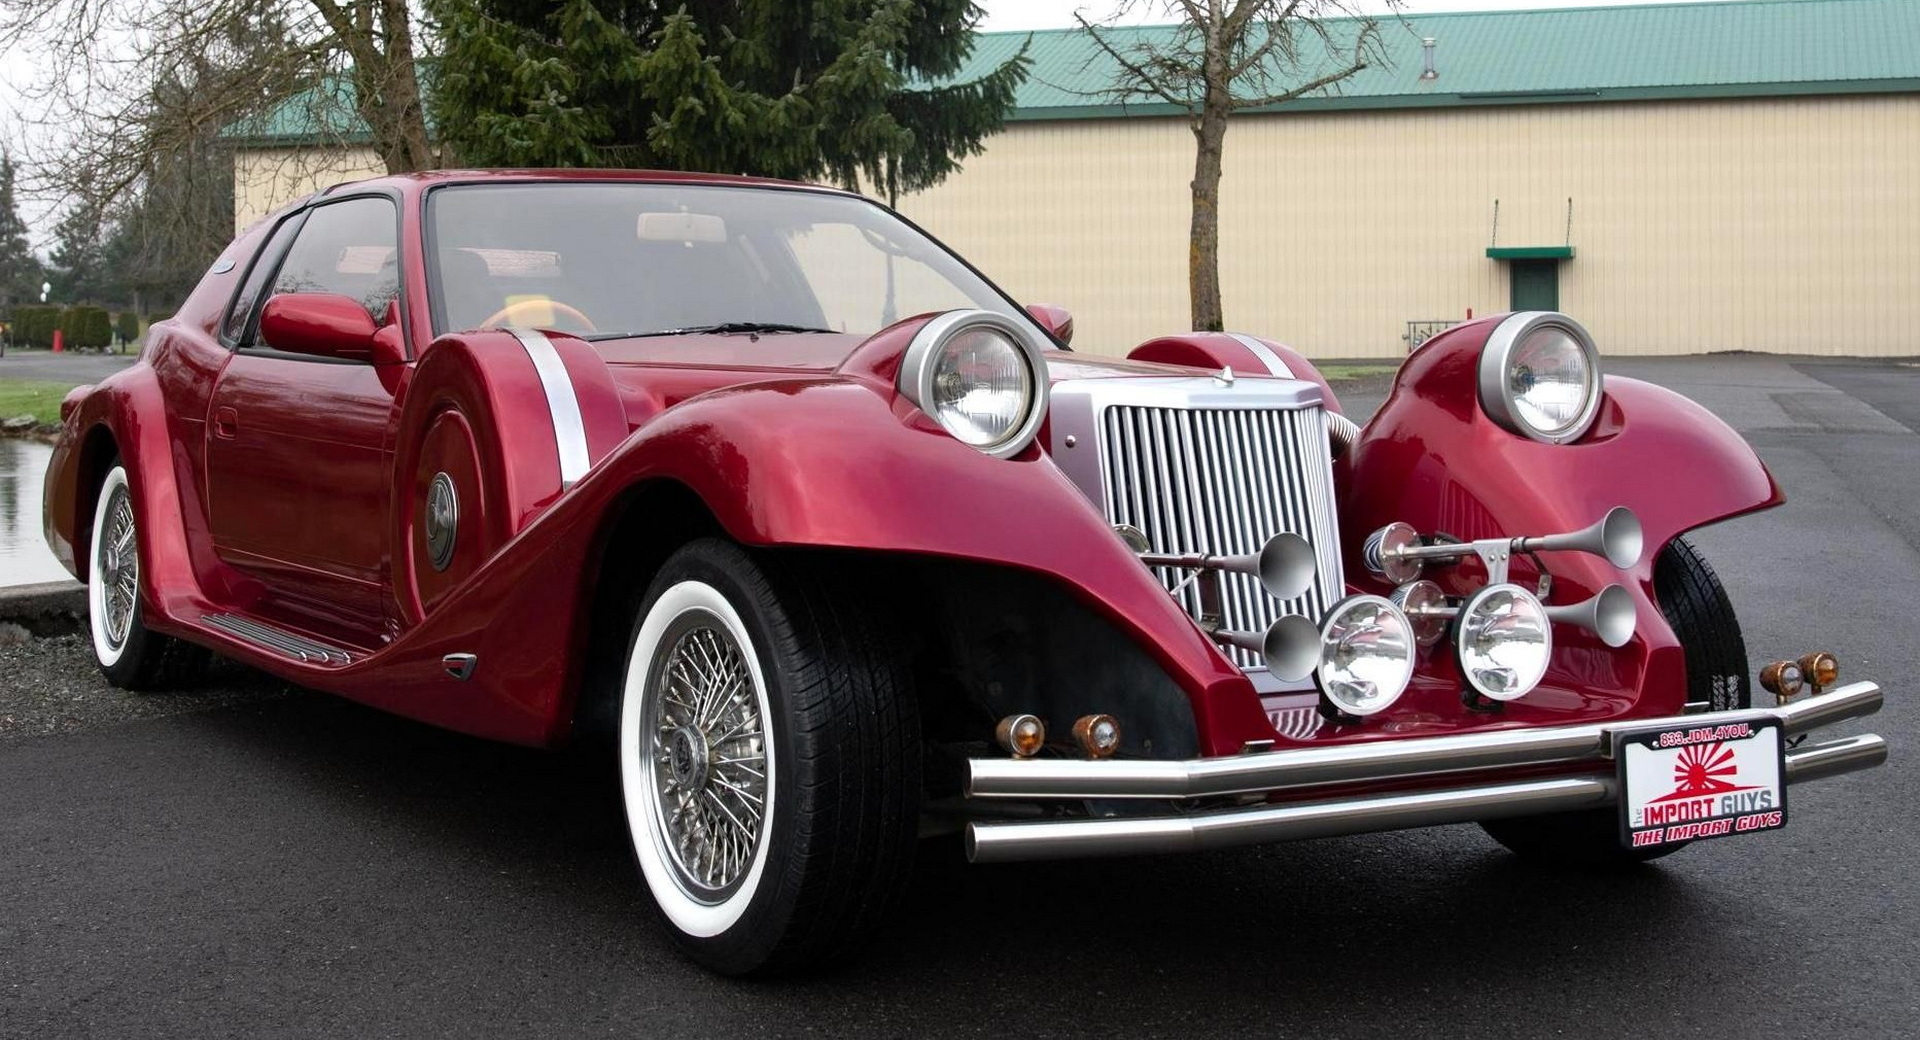 Walk On The Wild Le Seyde: Your Opportunity To Own A Mitsuoka In